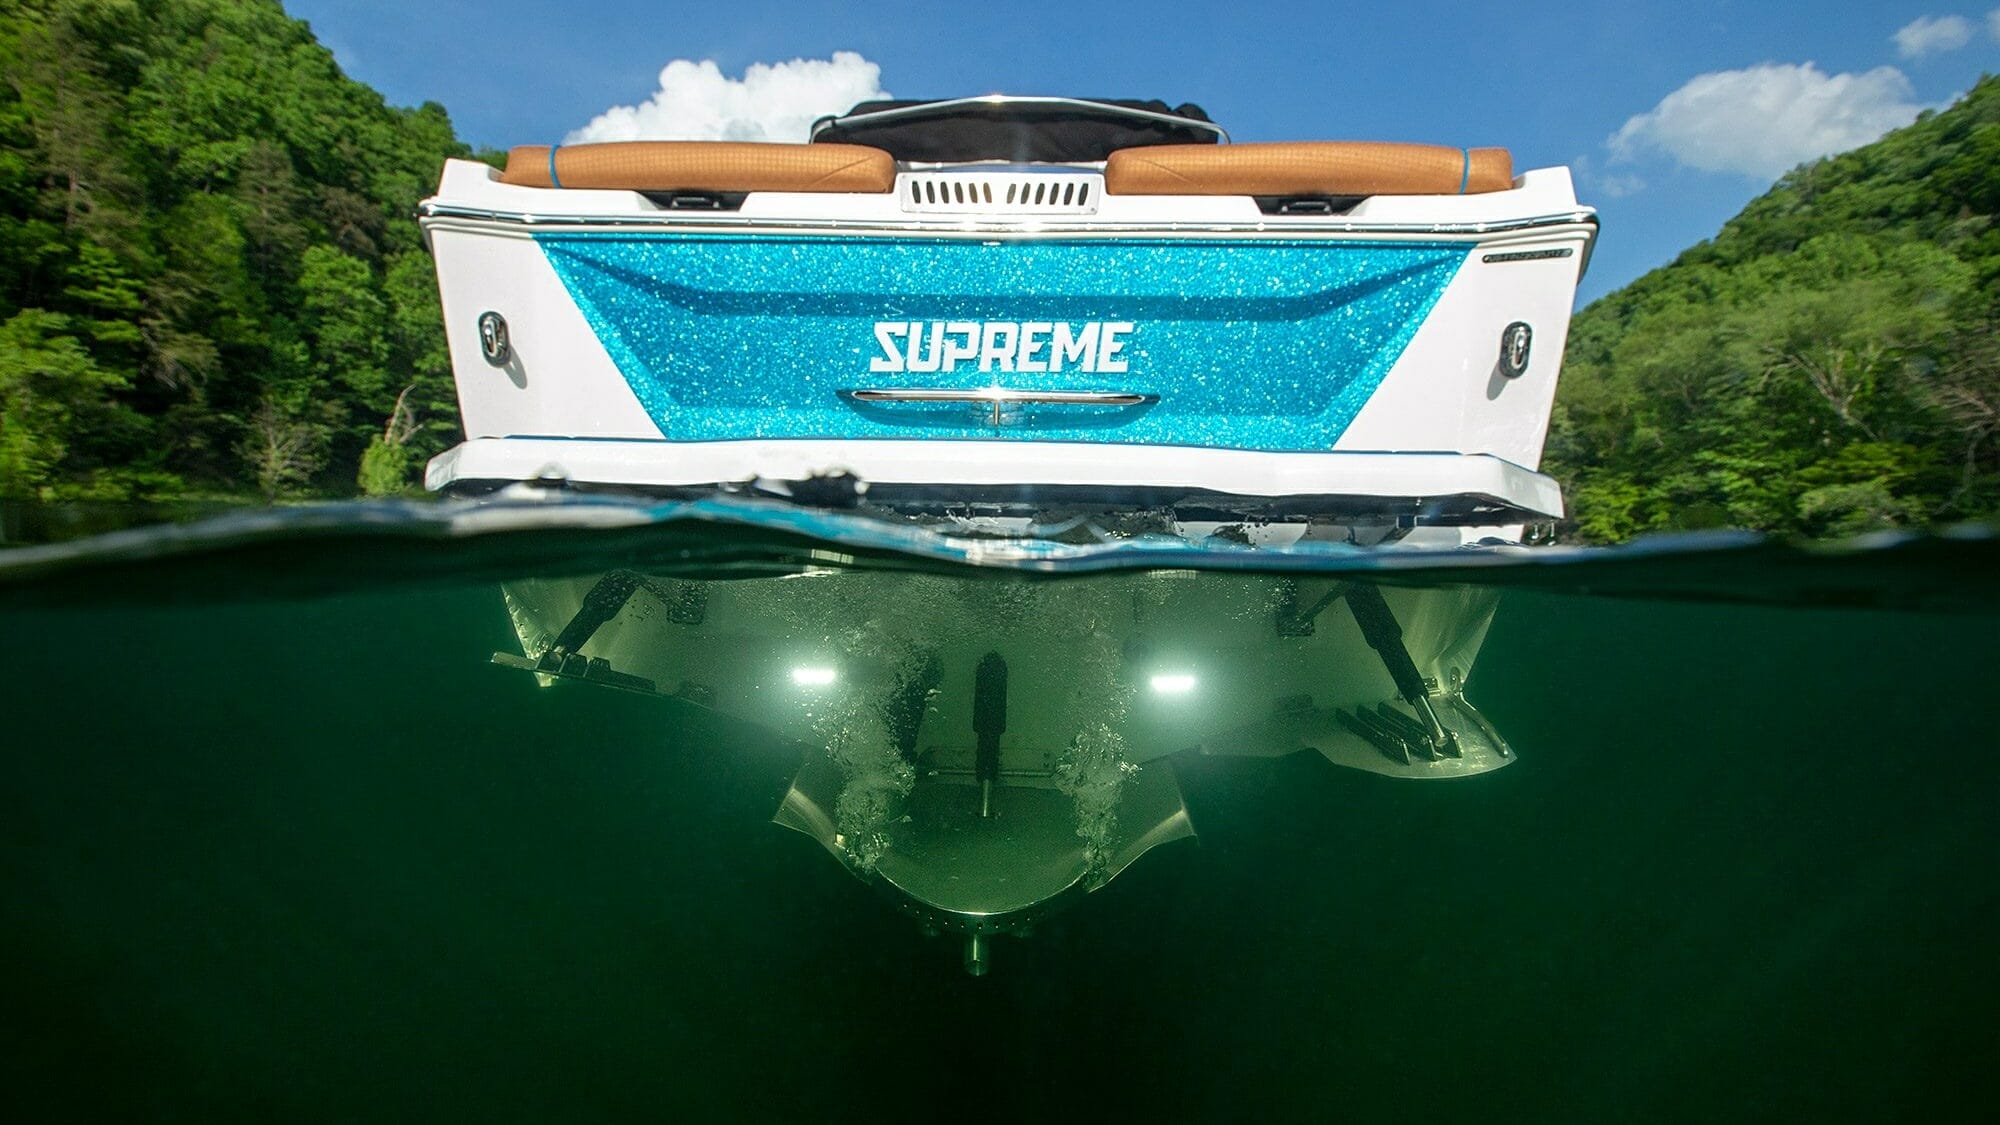 A Supreme boat with a blue and white hull in the water.